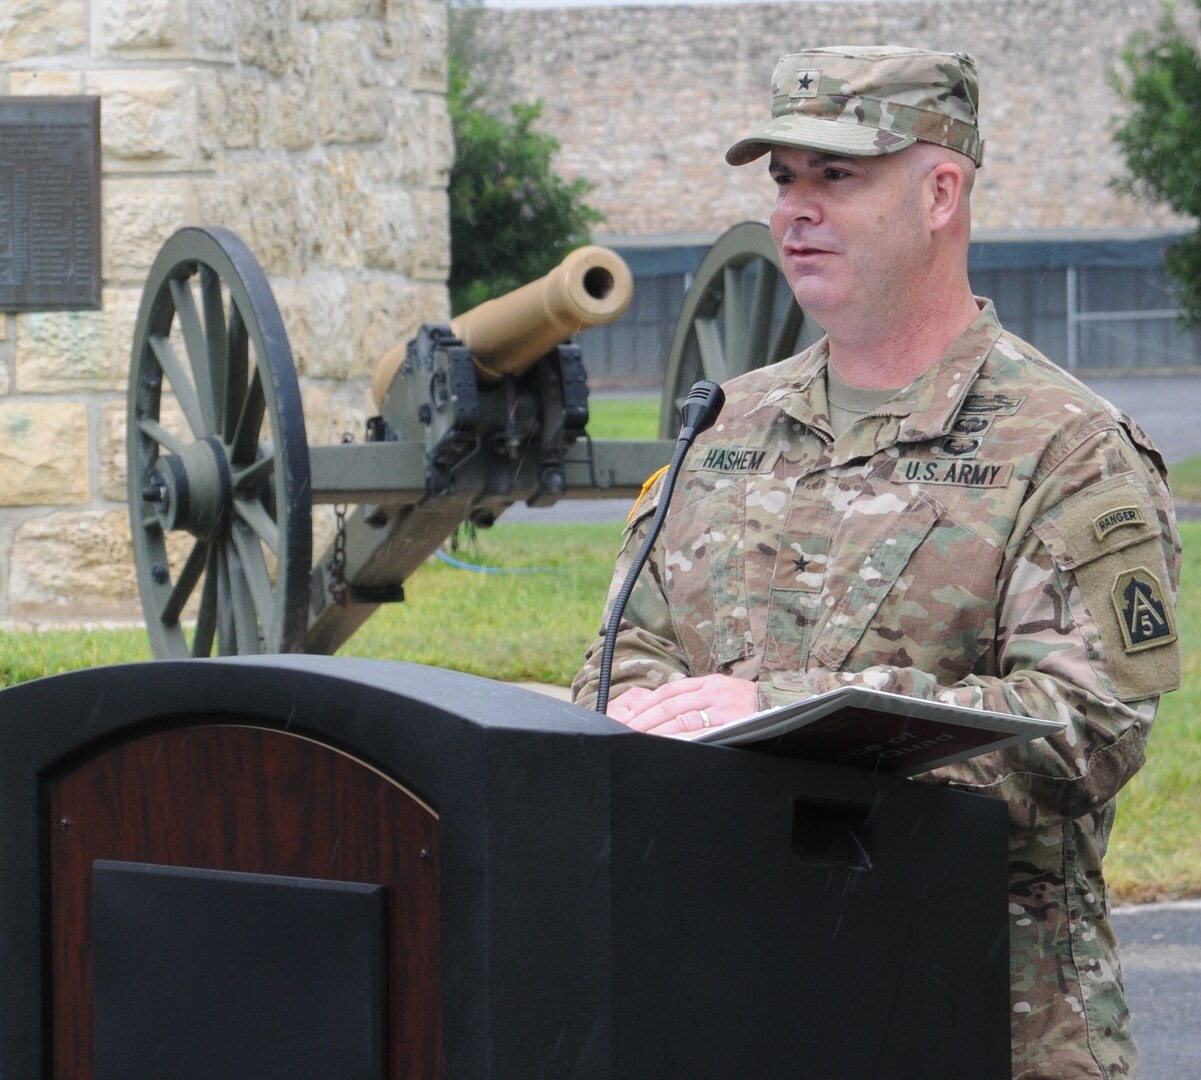 Brig. Gen. John B. Hashem gives a speech to members of Army North (Fifth Army) during a welcoming ceremony at the quadrangle at Joint Base San Antonio-Fort Sam Houston Nov. 7.